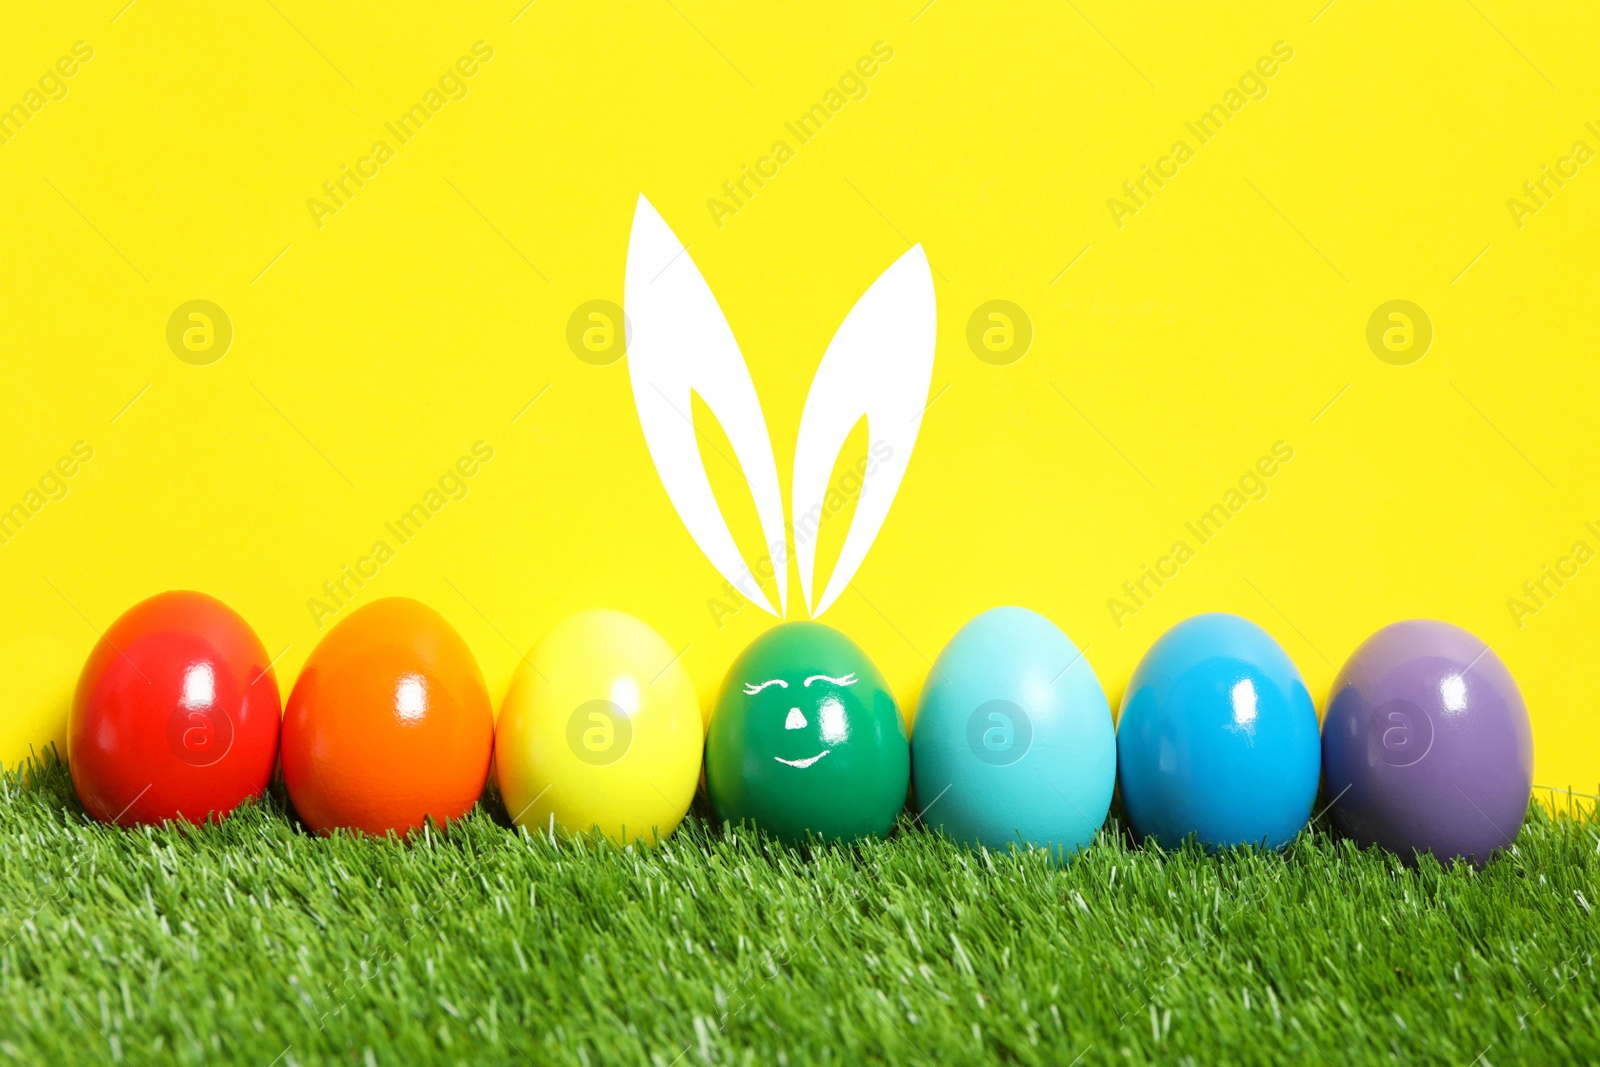 Image of One egg with drawn face and ears as Easter bunny among others on green grass against yellow background